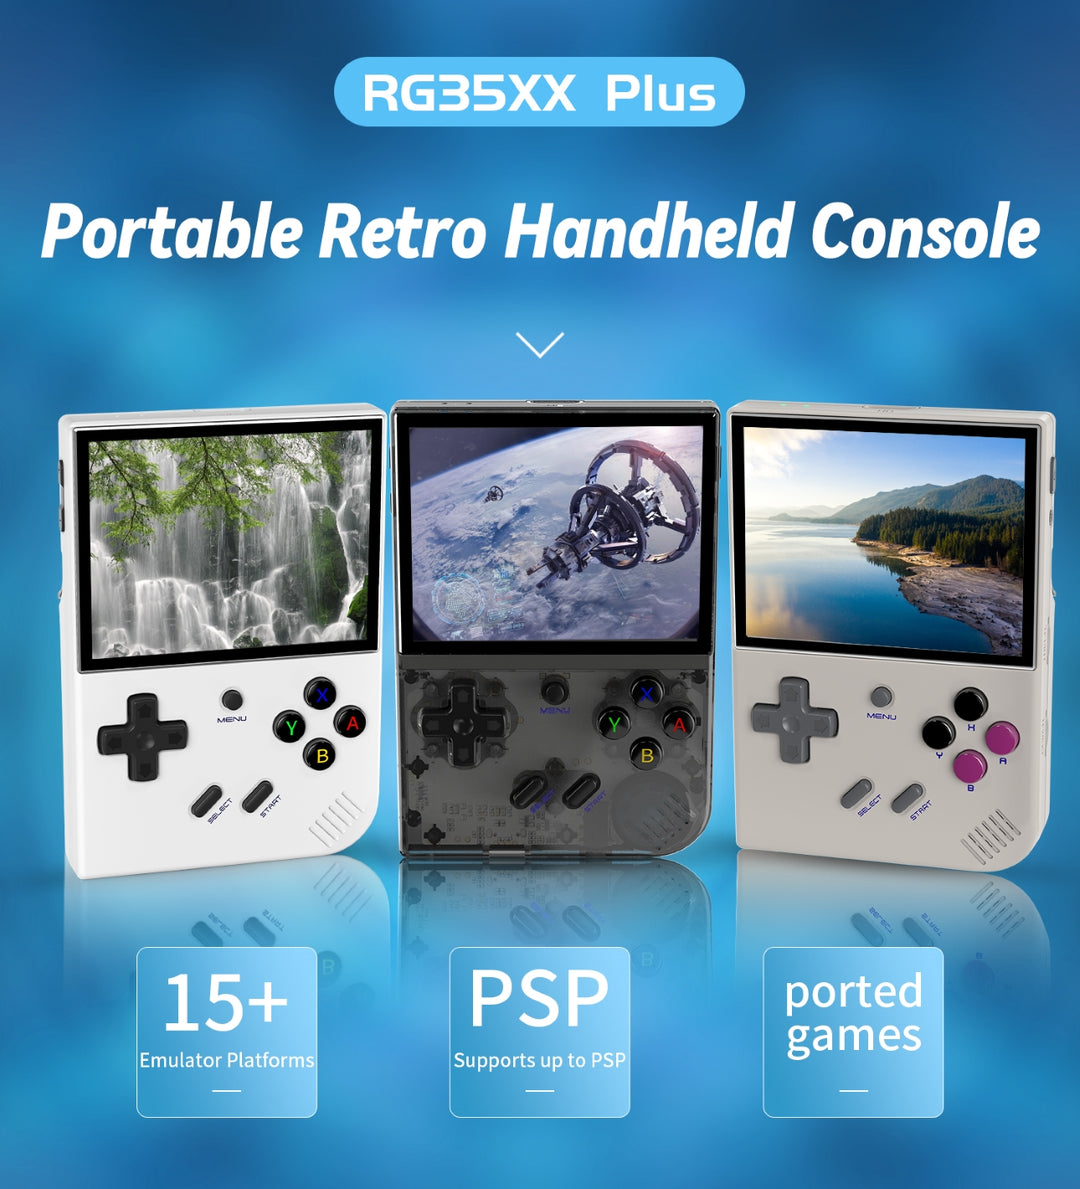 Anbernic RG35XX H (JUST RELEASED) – POCKET GAMES